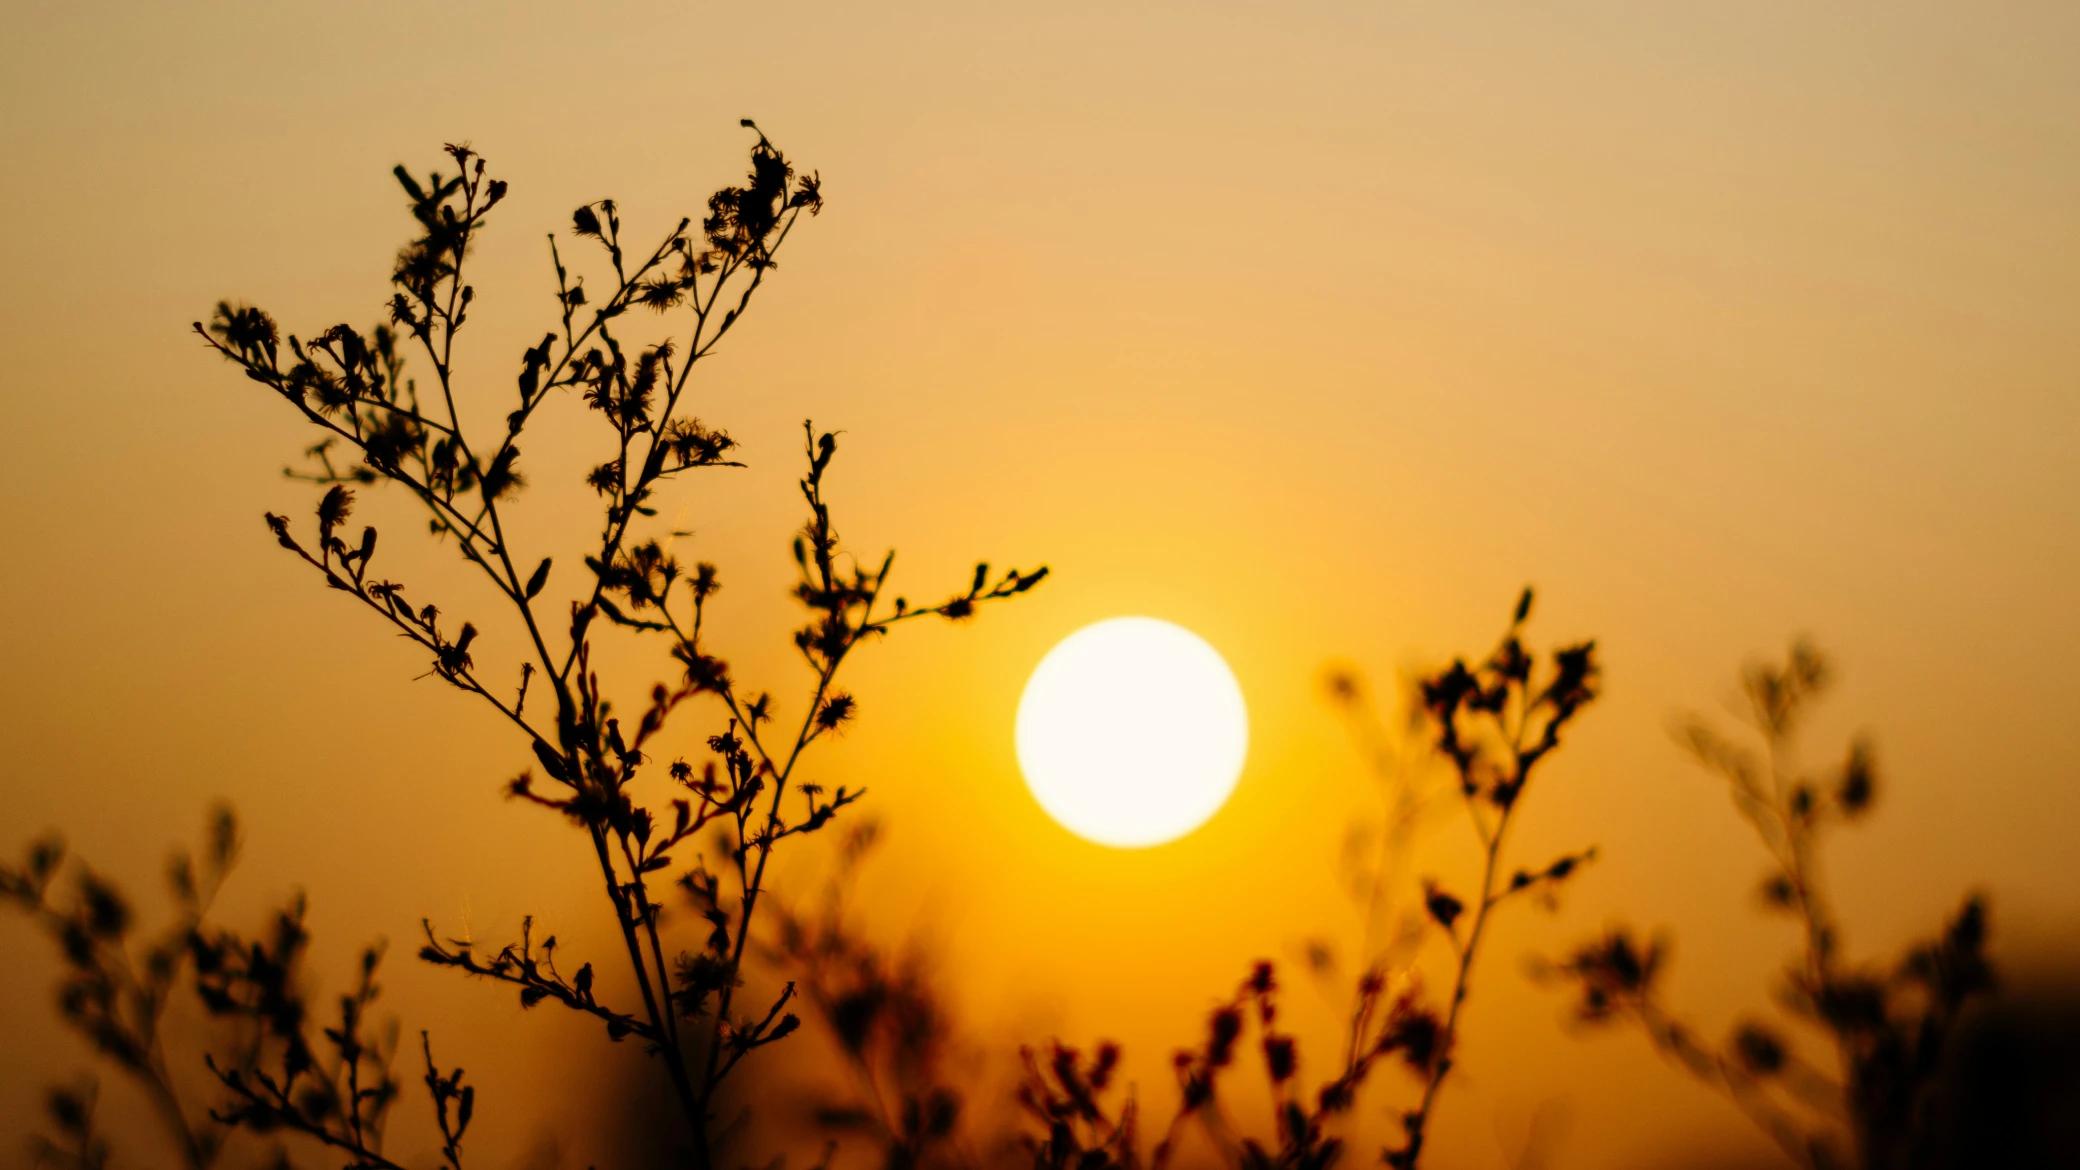 Sunset Sun over Thin Plants Branches. Photo by Thuong D on Pexels